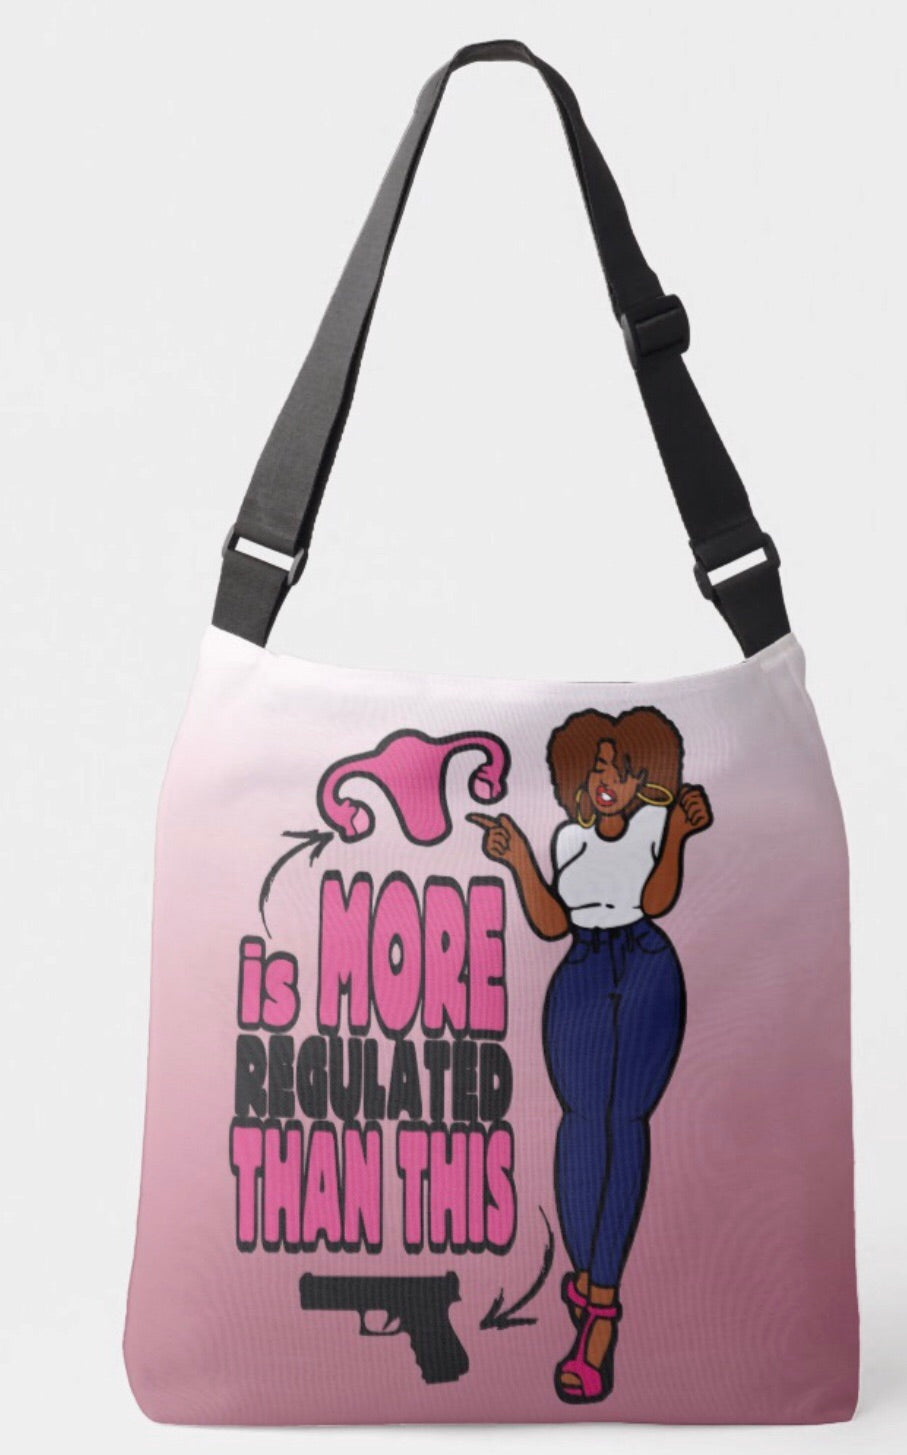 A Woman’s Body Is More Regulated Than Guns Crossbody Tote Bag